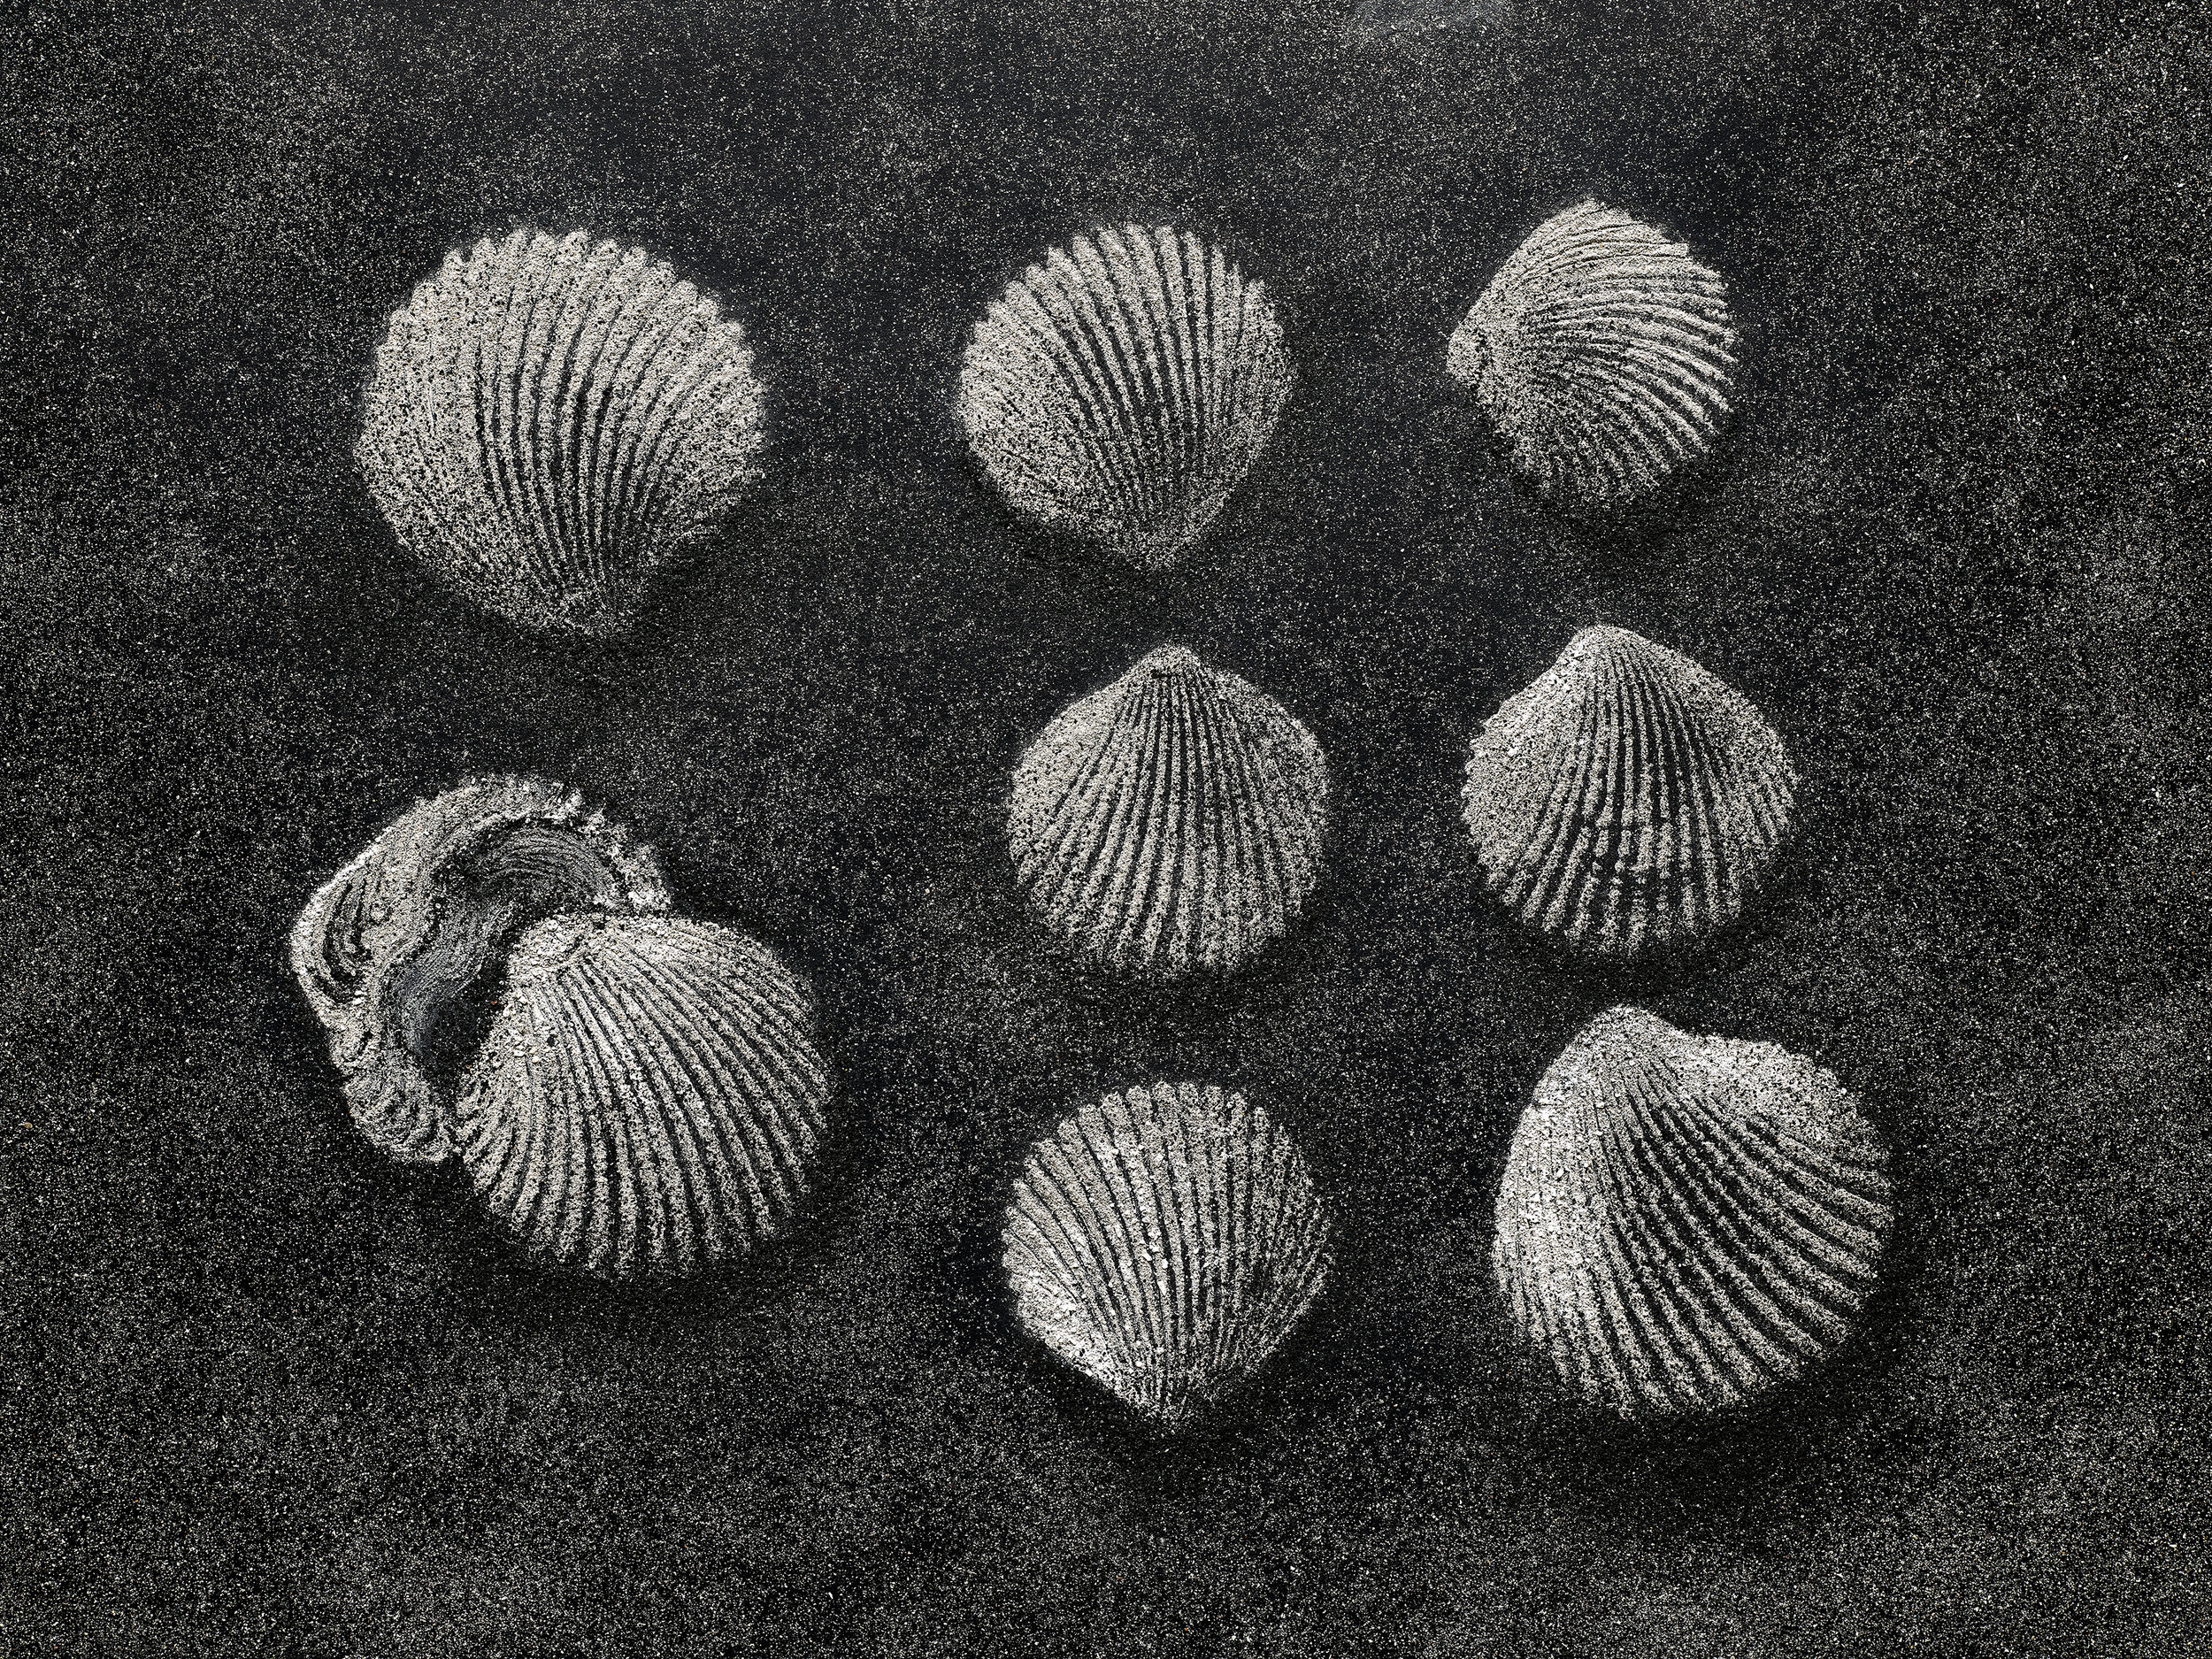 Seashell fossil, Paris Bay, 45 million years, Museum of Ashes, 2019